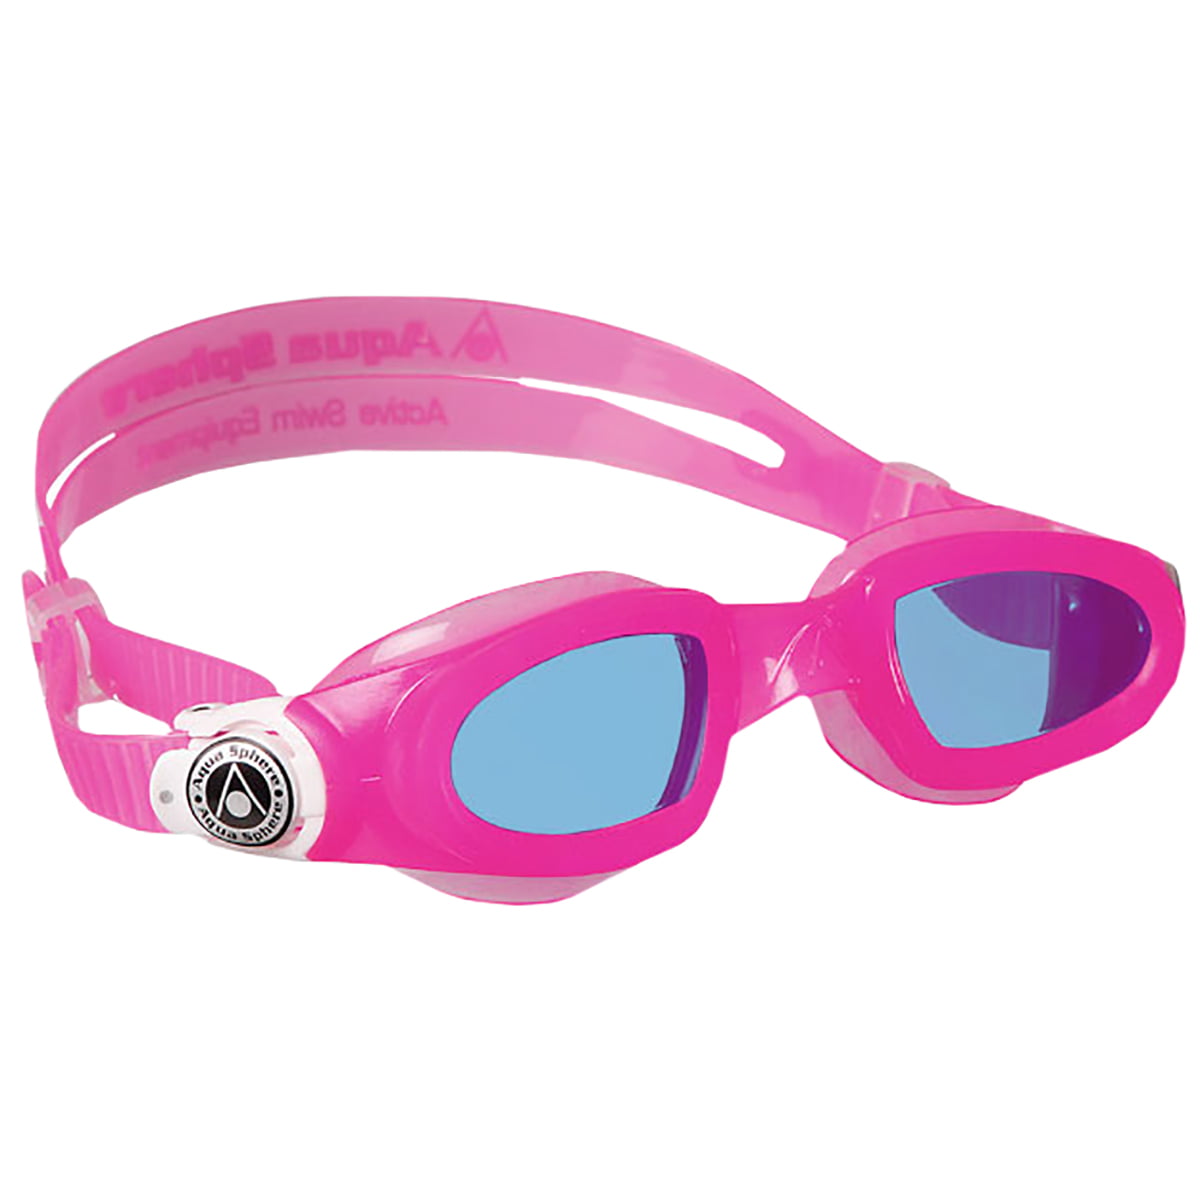 Blue Lens One Size Aqua Sphere Moby Kids' Swimming Goggles in Pink & White 